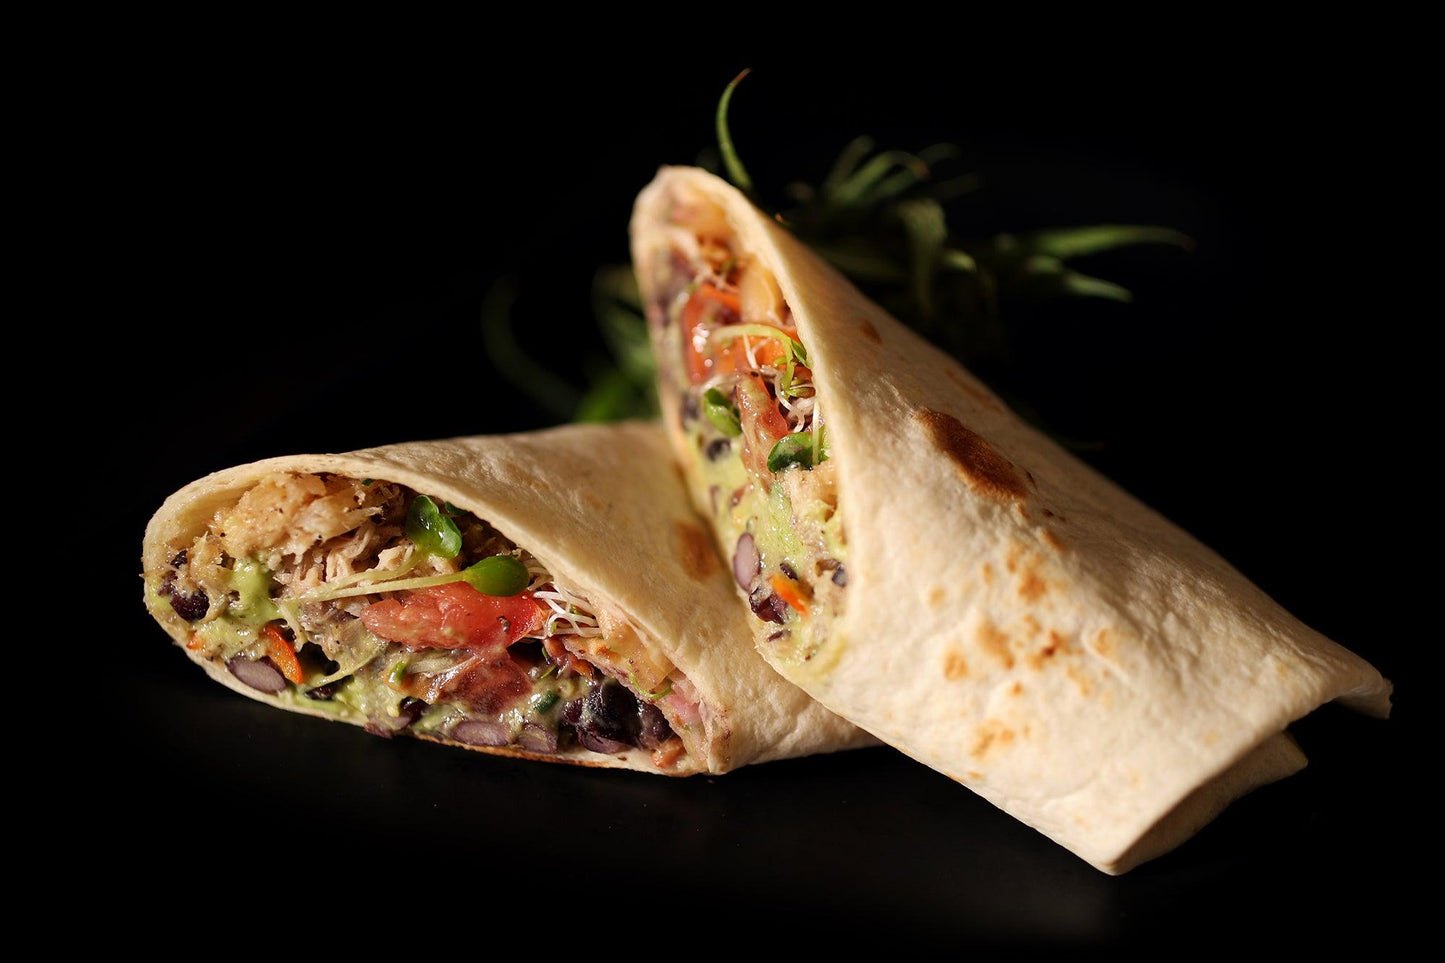 Burrito - Photography and Web Design - Los Angeles, US based Shopify Experts Revo Designs